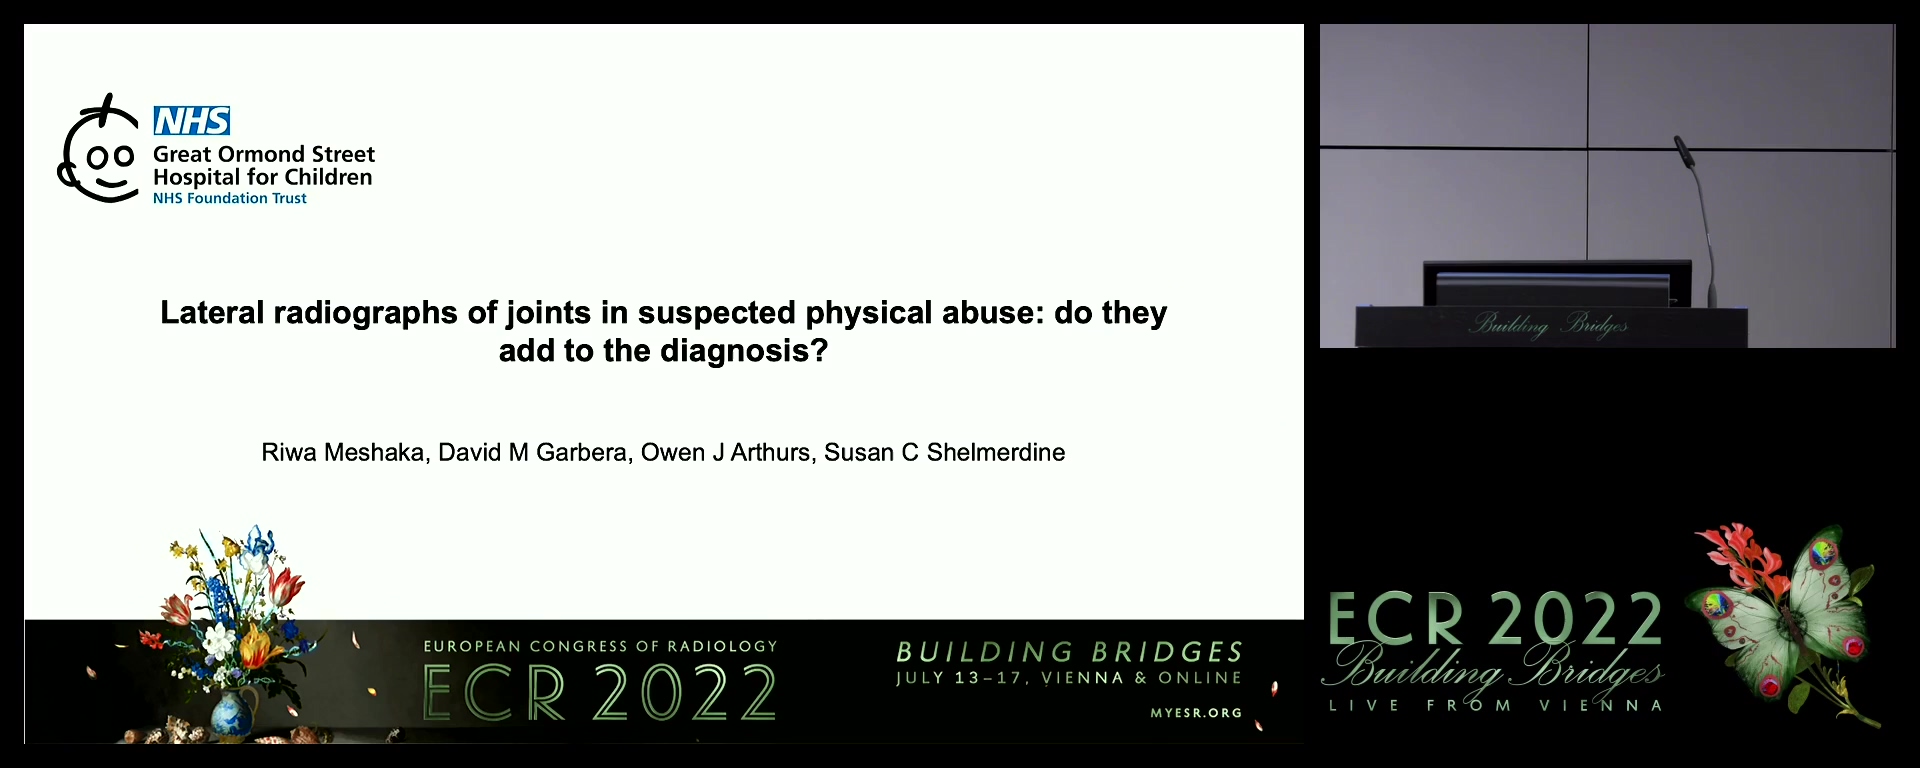 Lateral radiographs of joints in suspected physical abuse: do they add to the diagnosis? - Riwa Meshaka, London / UK